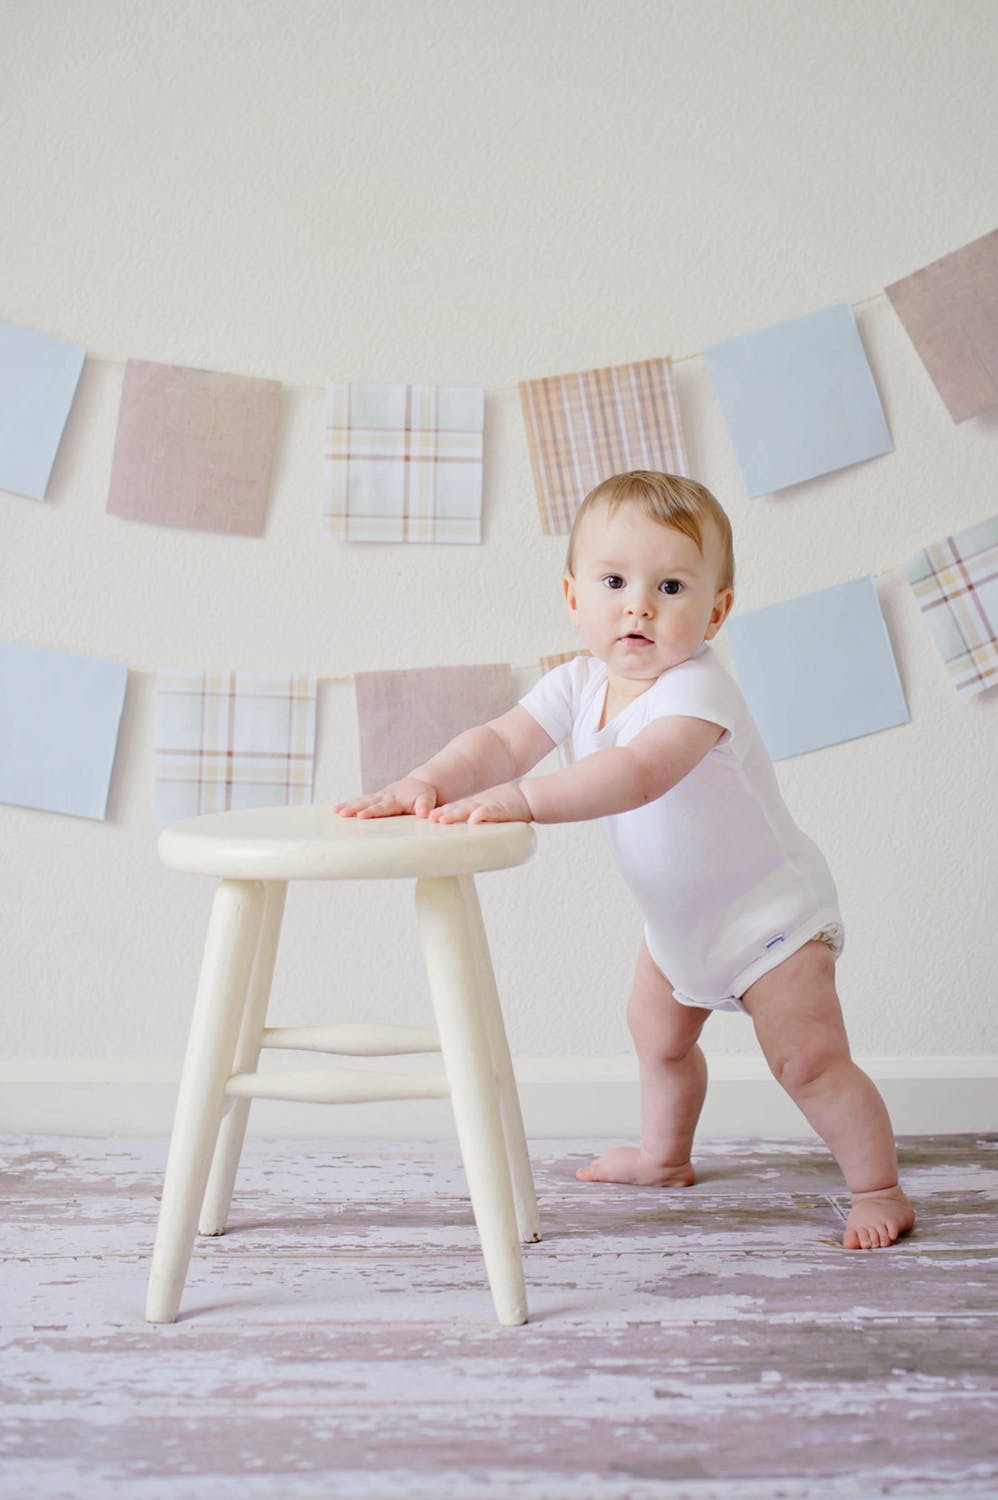 Why You Should Consider Cloth Diapering